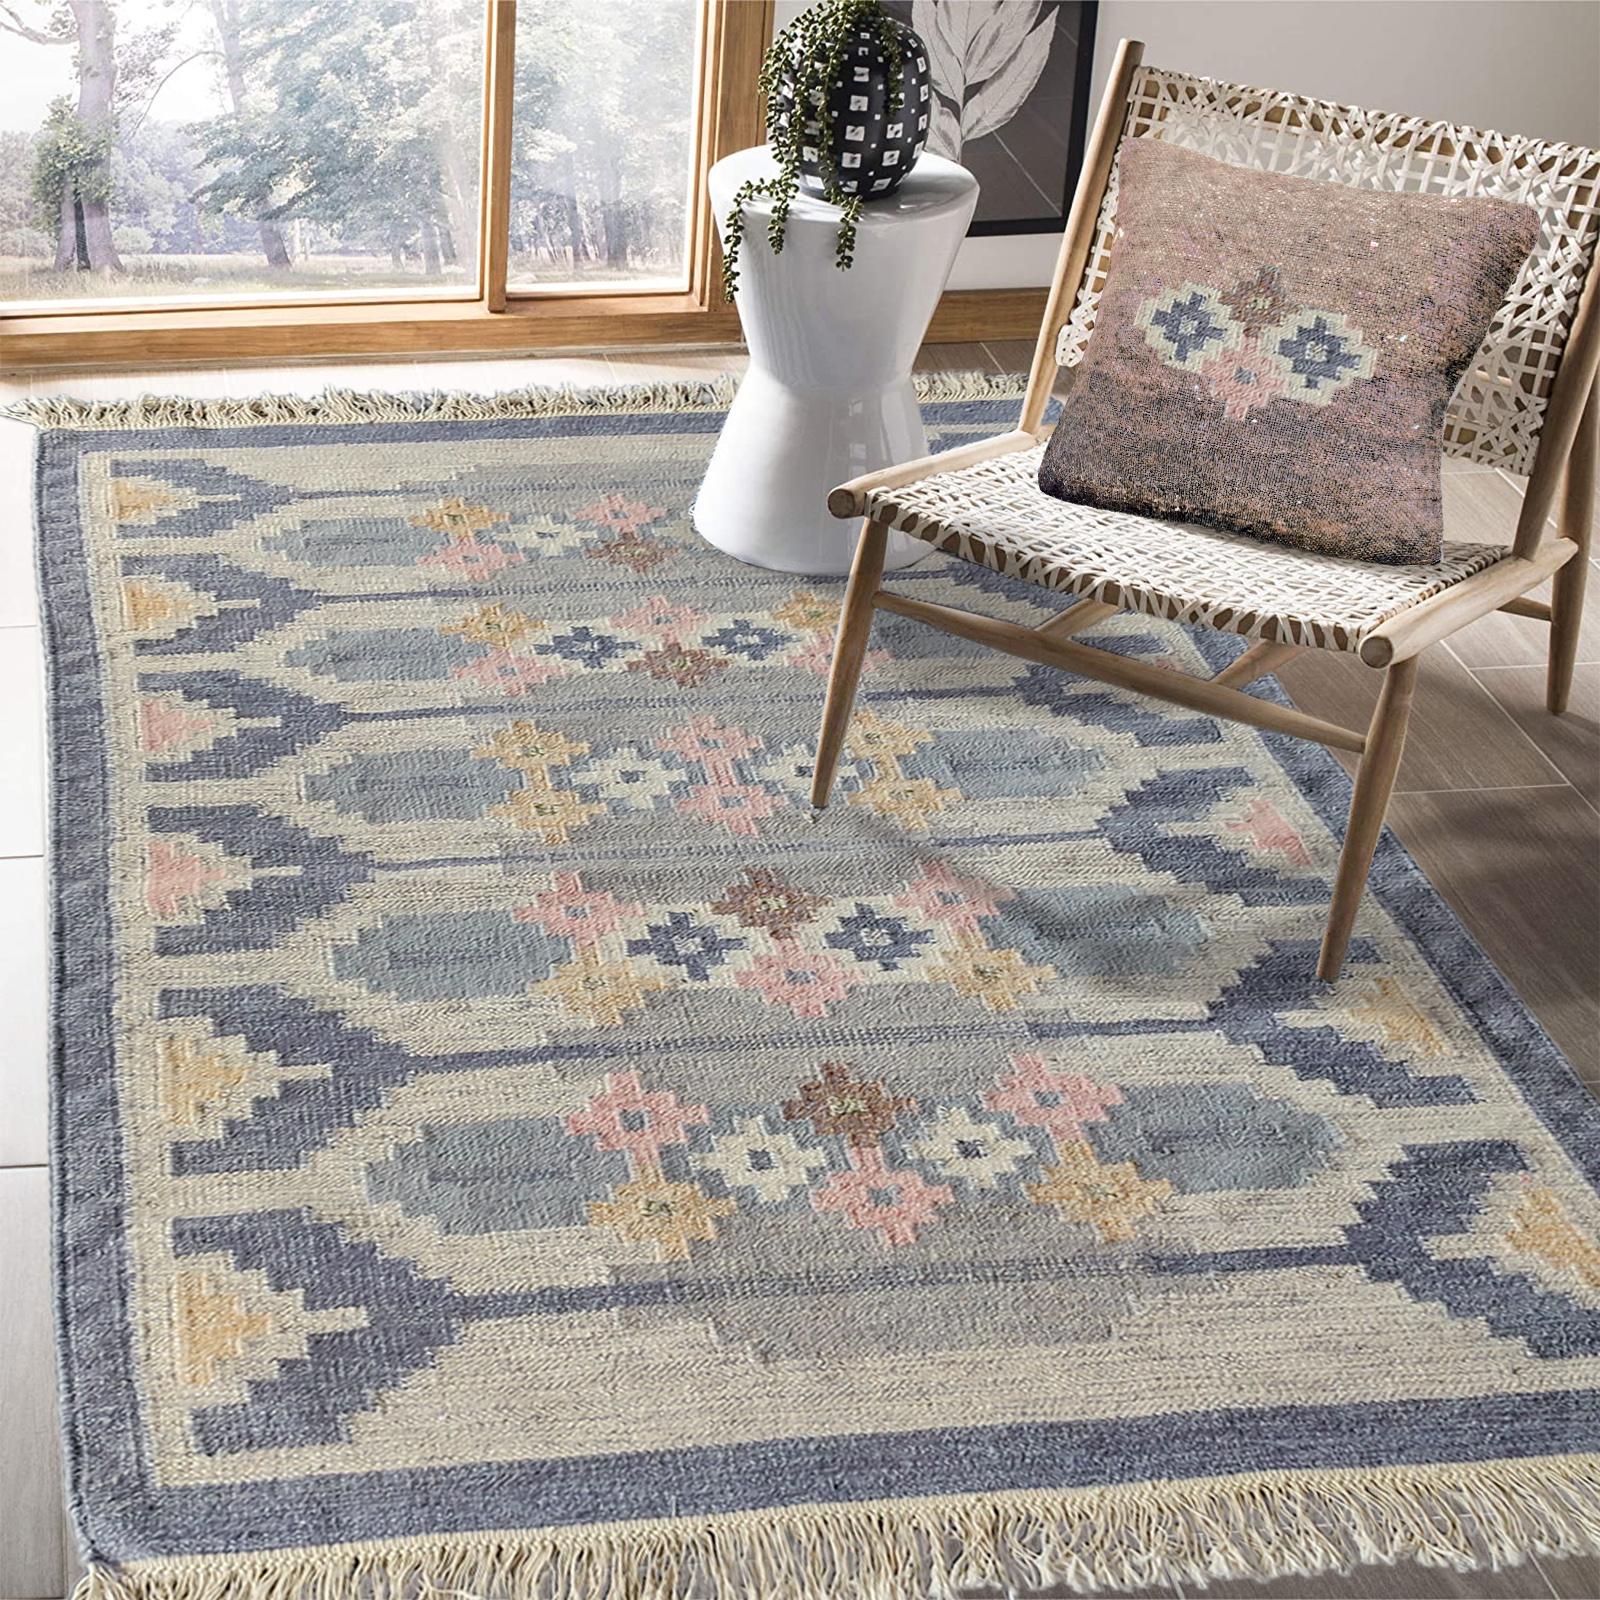 Vintage Swedish Kilim Ingegerd Silow Design Geometric Pattern, Sweden 1960s.
Genuine Röllakan made of wool, hand woven, the light blue field features an all-over geometric pattern composed of smaller stepped star motifs in soft shades of pink,